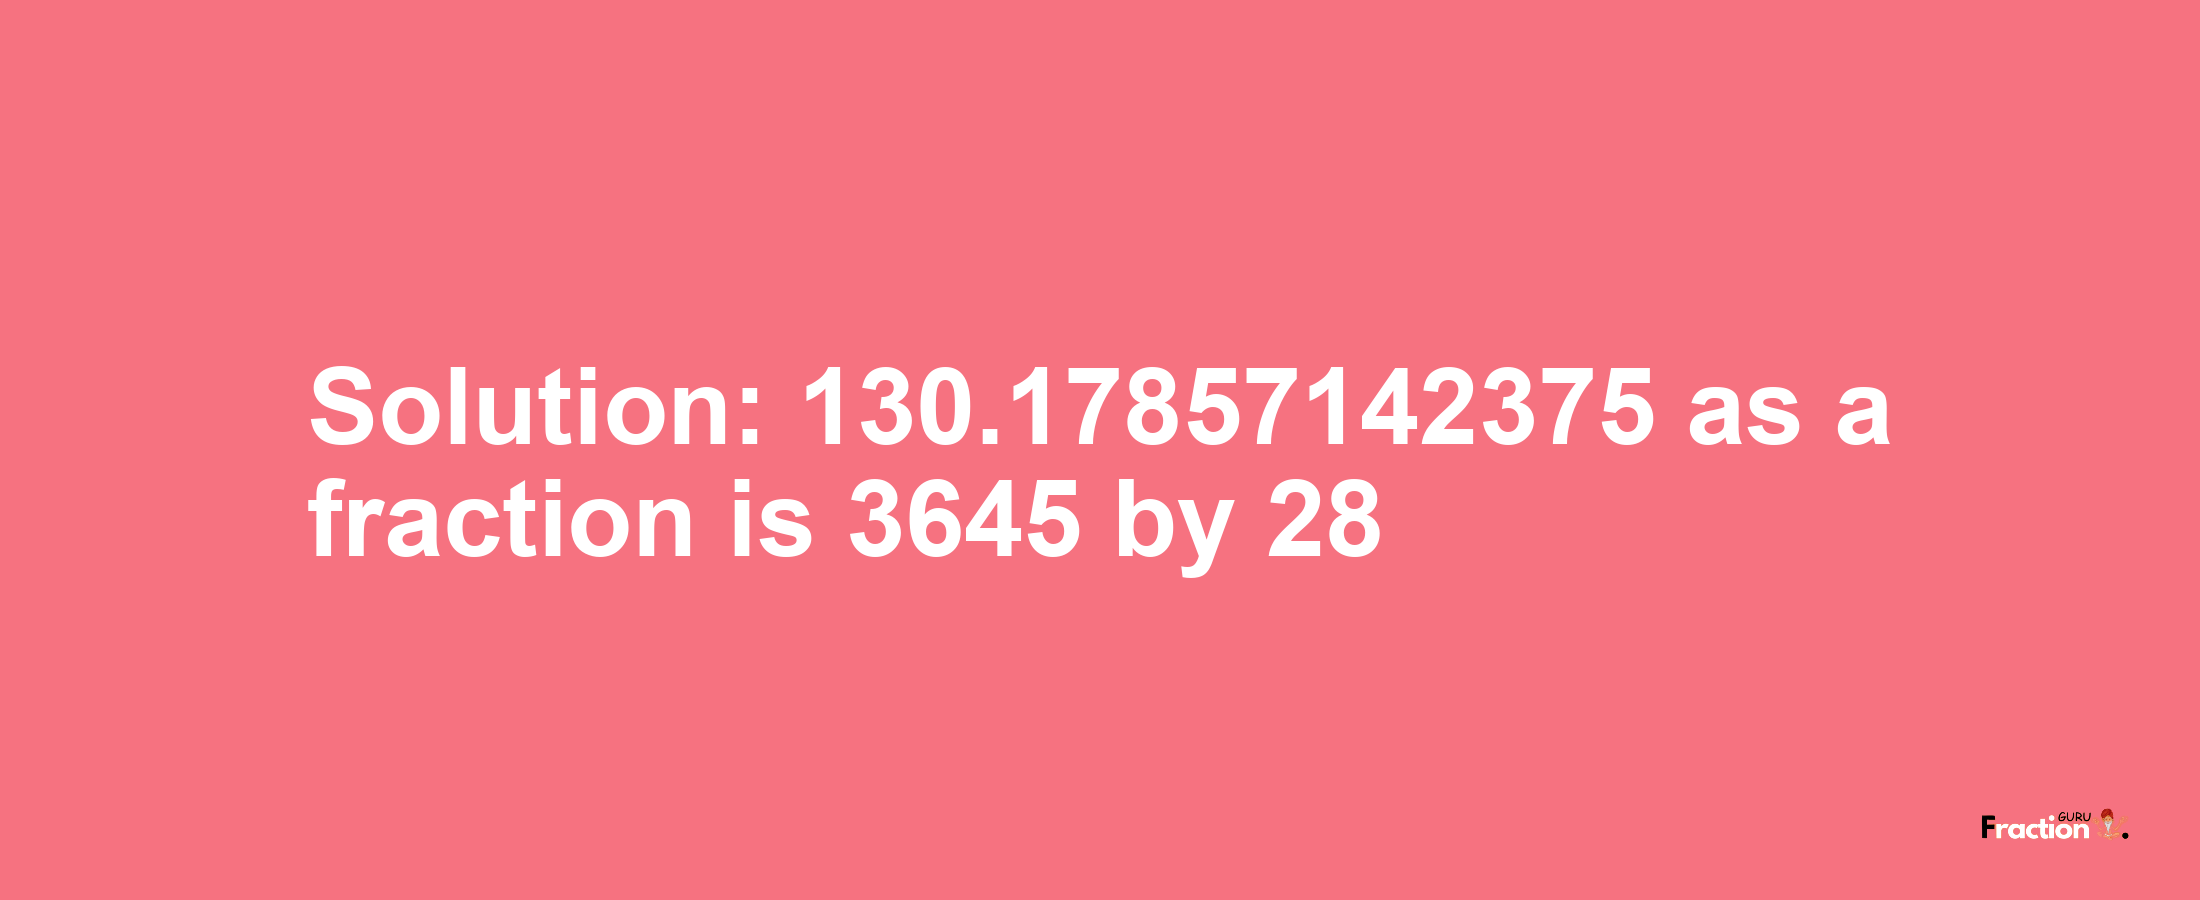 Solution:130.17857142375 as a fraction is 3645/28